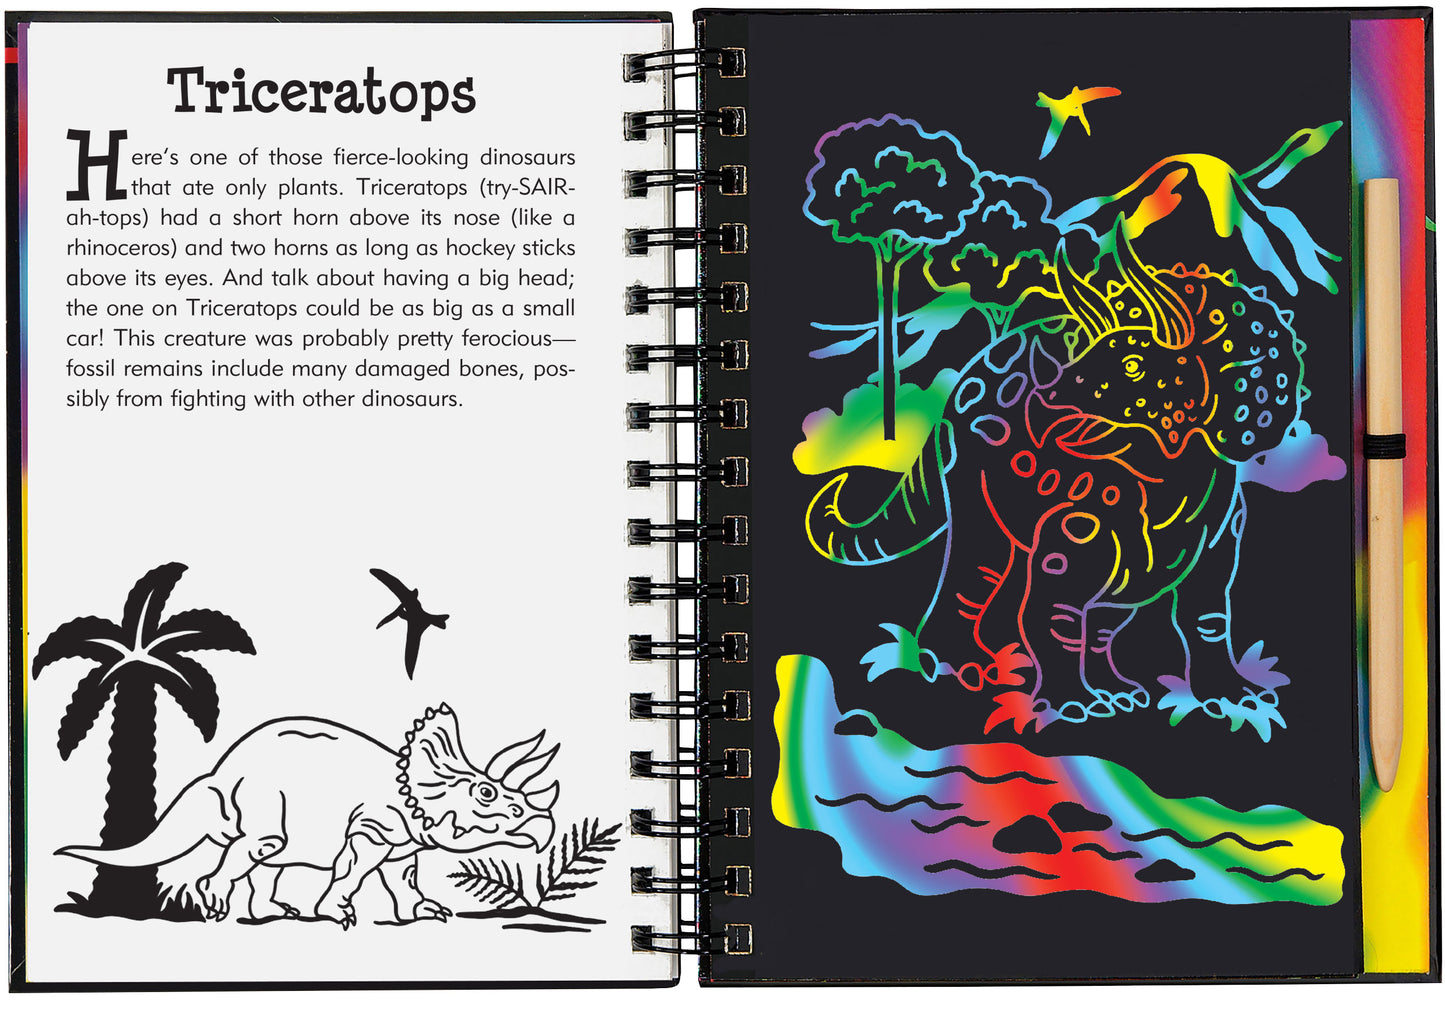 scratch and sketch jurassic & beyond dinosaurs flying swimming prehistoric creatures wooden stylus black-coated papers patterns swirls holographic colors colorful coloring art artists hardcover illustrations educational ages 6+ non-toxic paleontologists